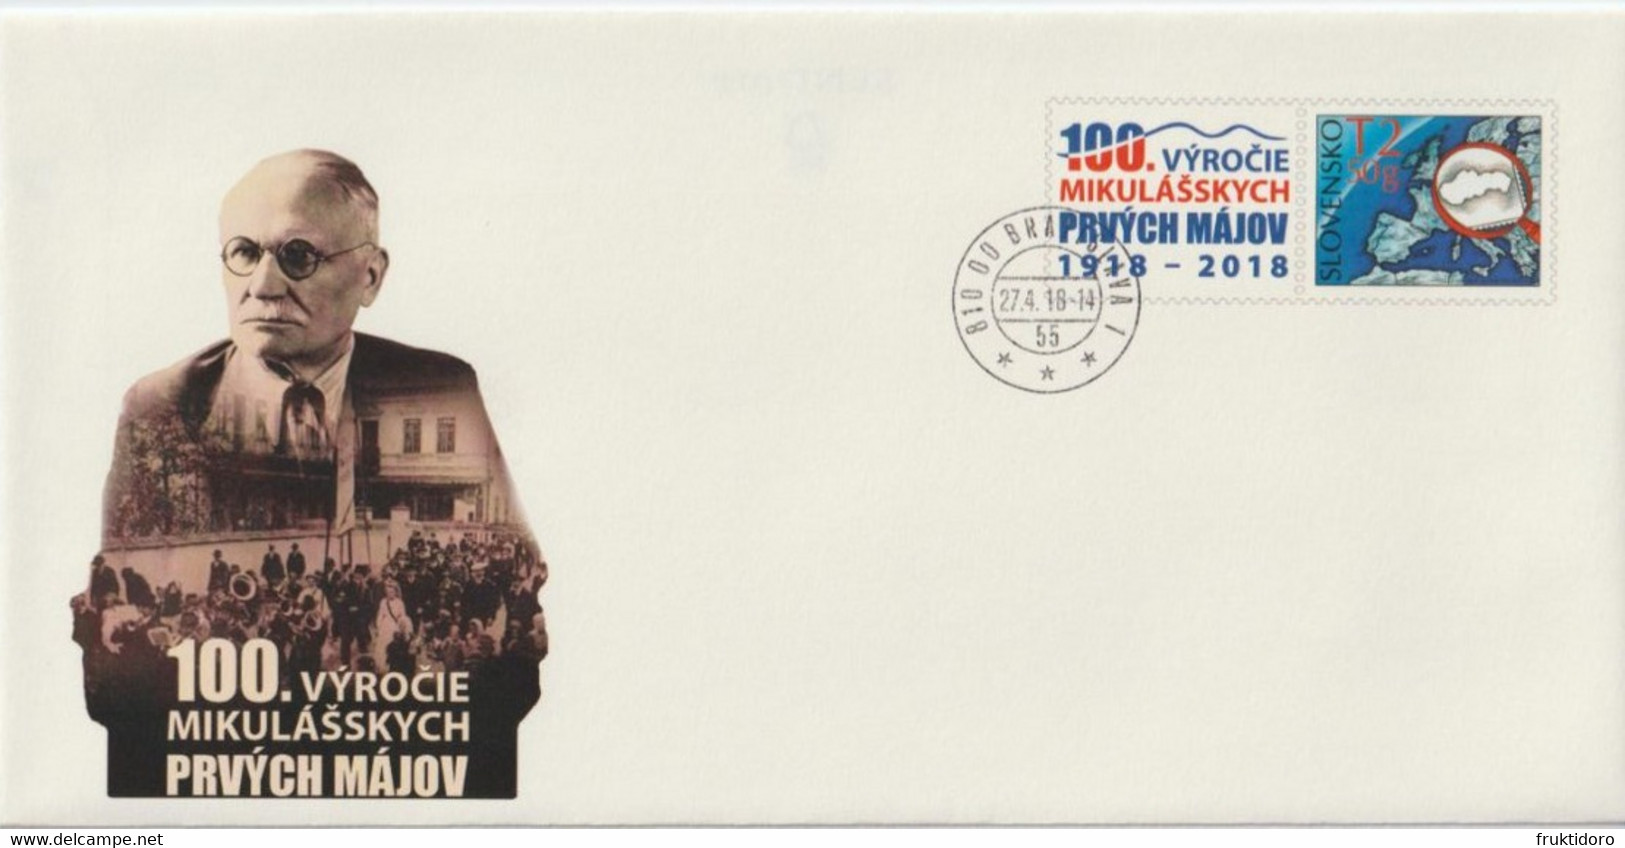 Slovakia Postal Stationery - 100th Anniversary Of The May 1st In L. Mikuláš - 2018 - Map - Magnifying Glass - Covers